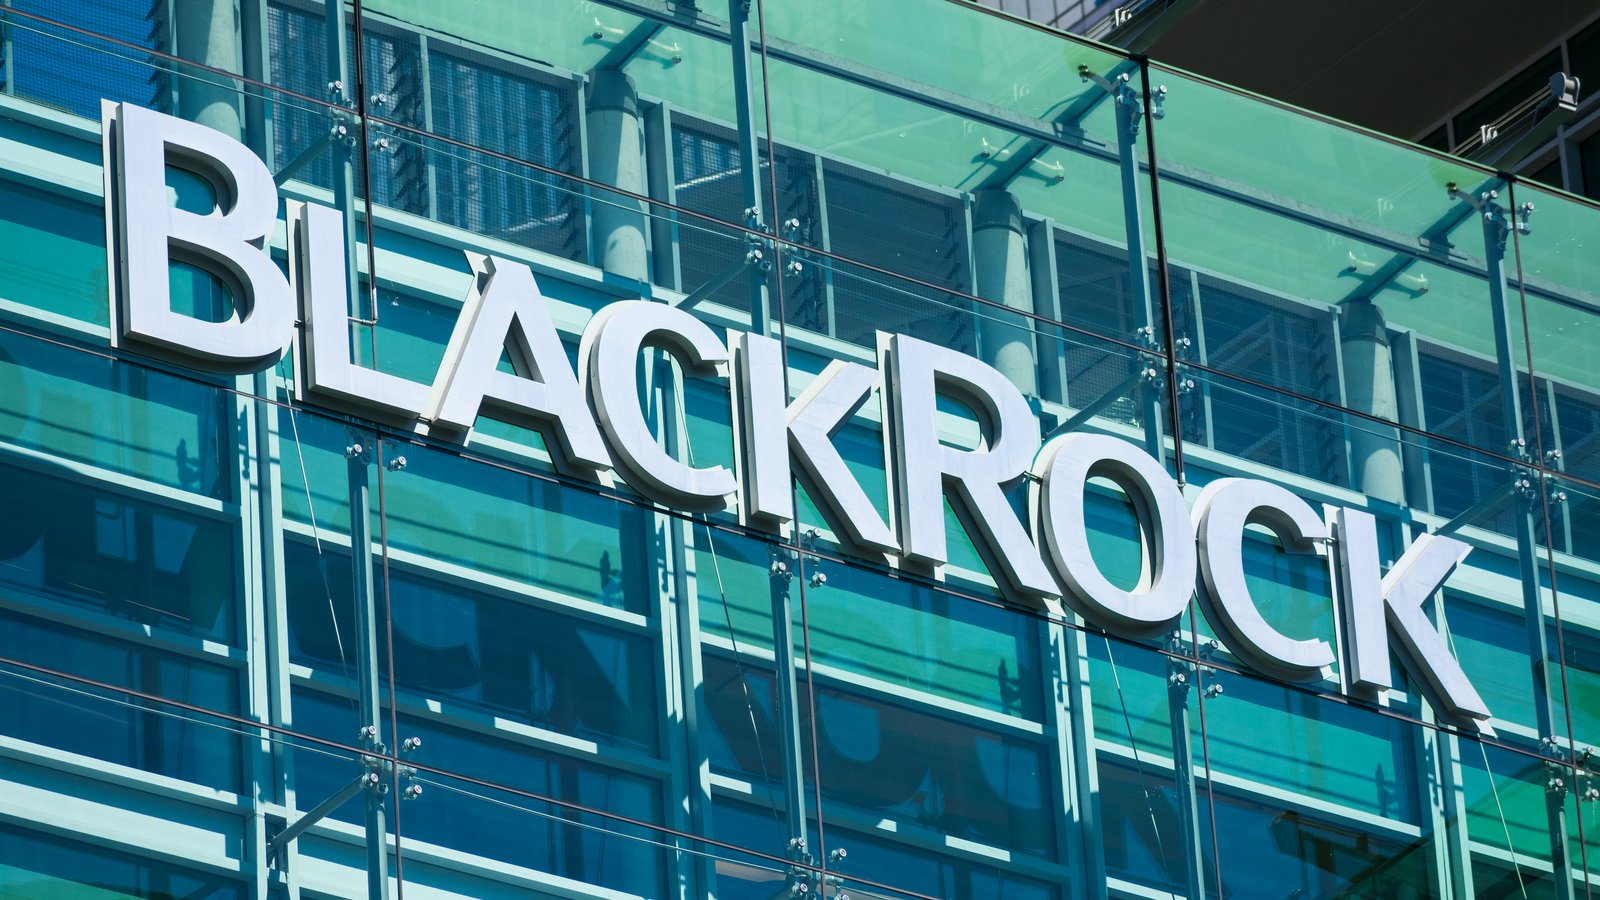 Bitcoin ETF Leader BlackRock Leads $47M Funding Round in Securitize